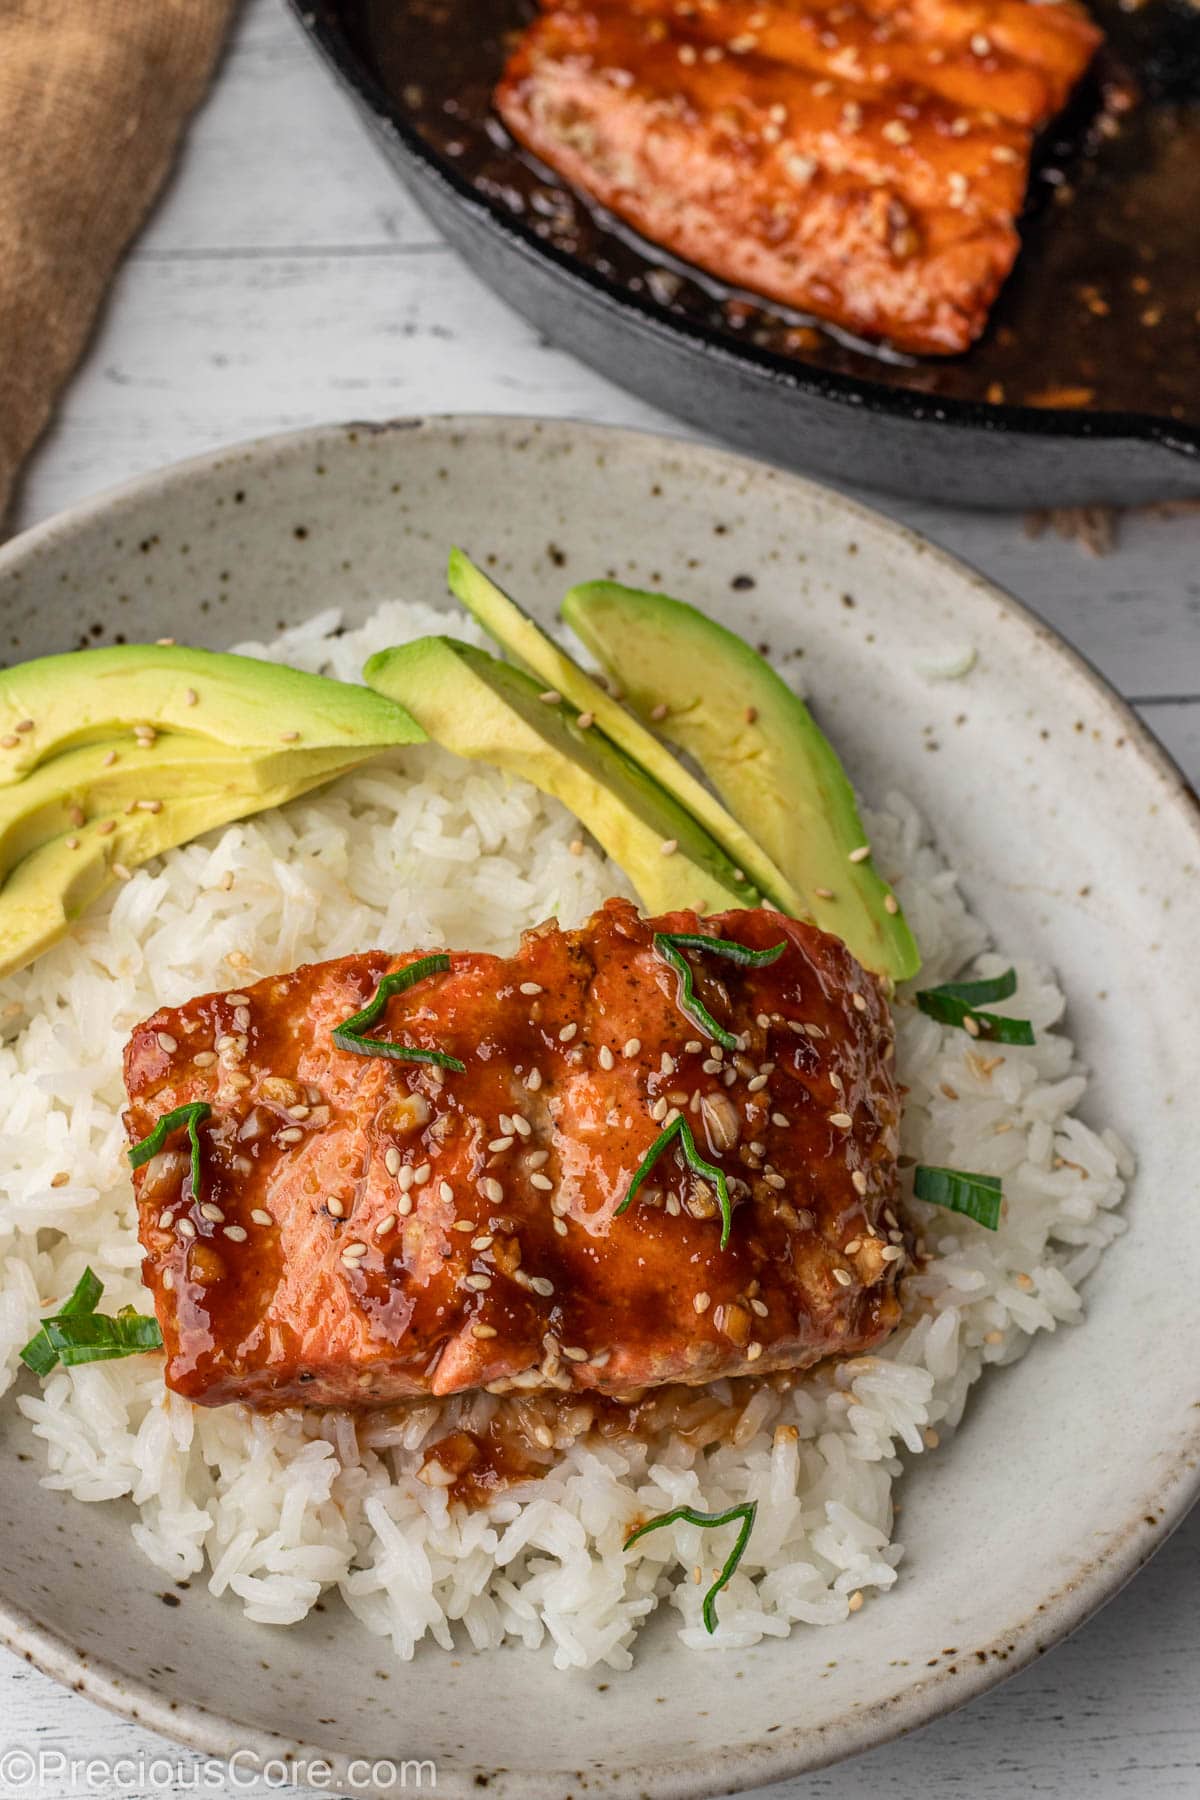 Piece of teriyaki salmon over white rice in a bowl, with avocado slices on the side.